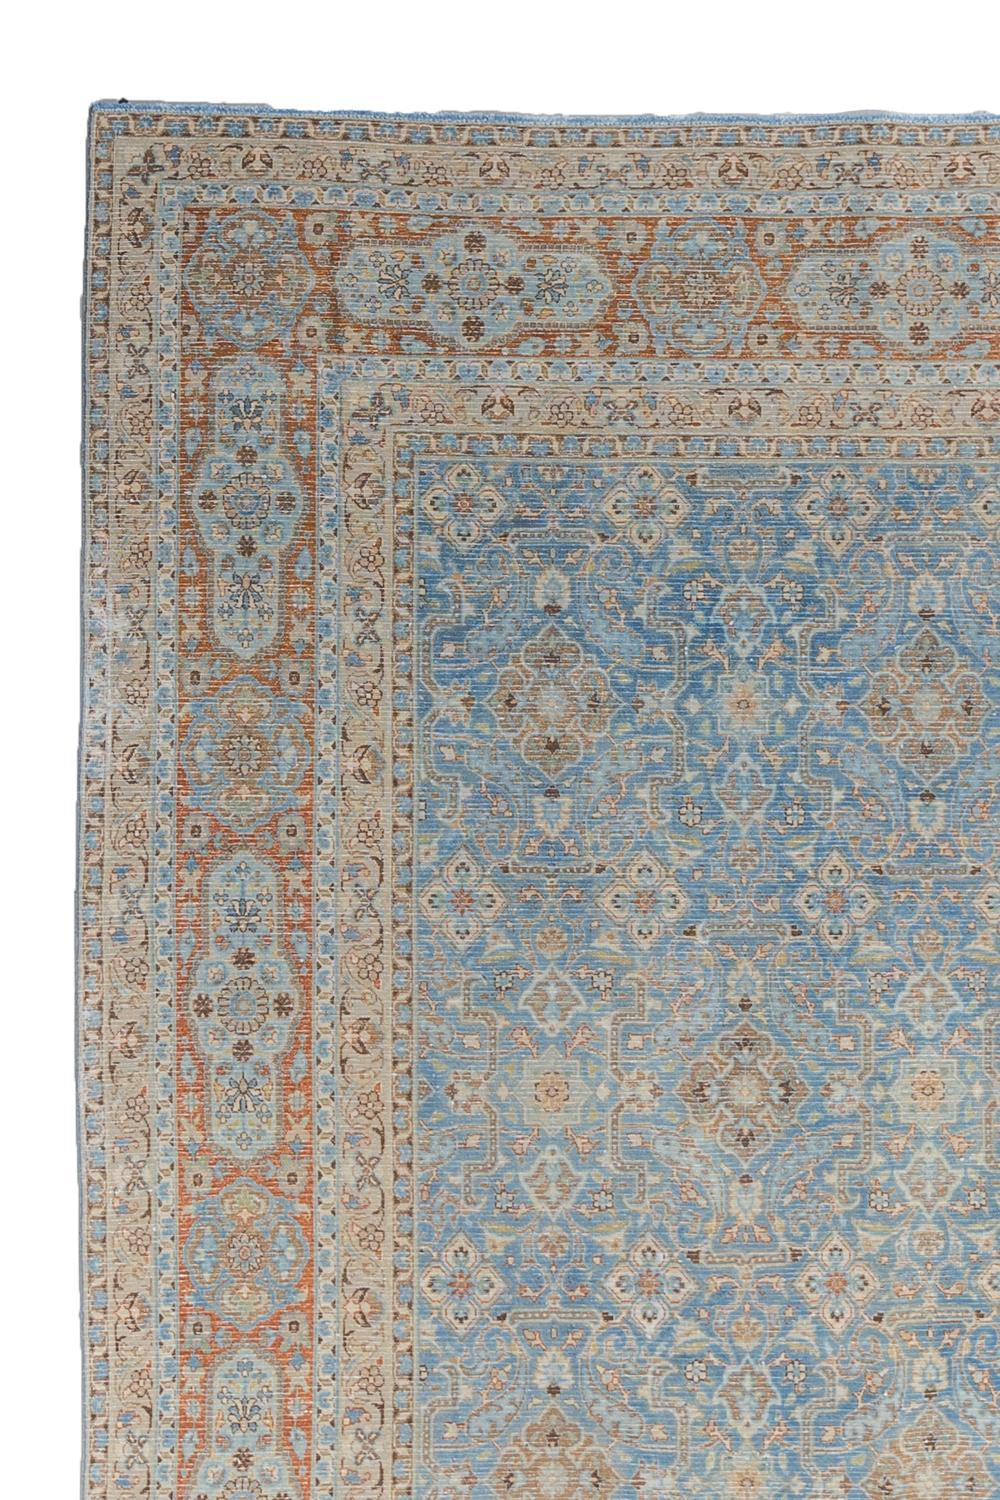 Antique Persian Tabriz Rug In Good Condition For Sale In West Palm Beach, FL